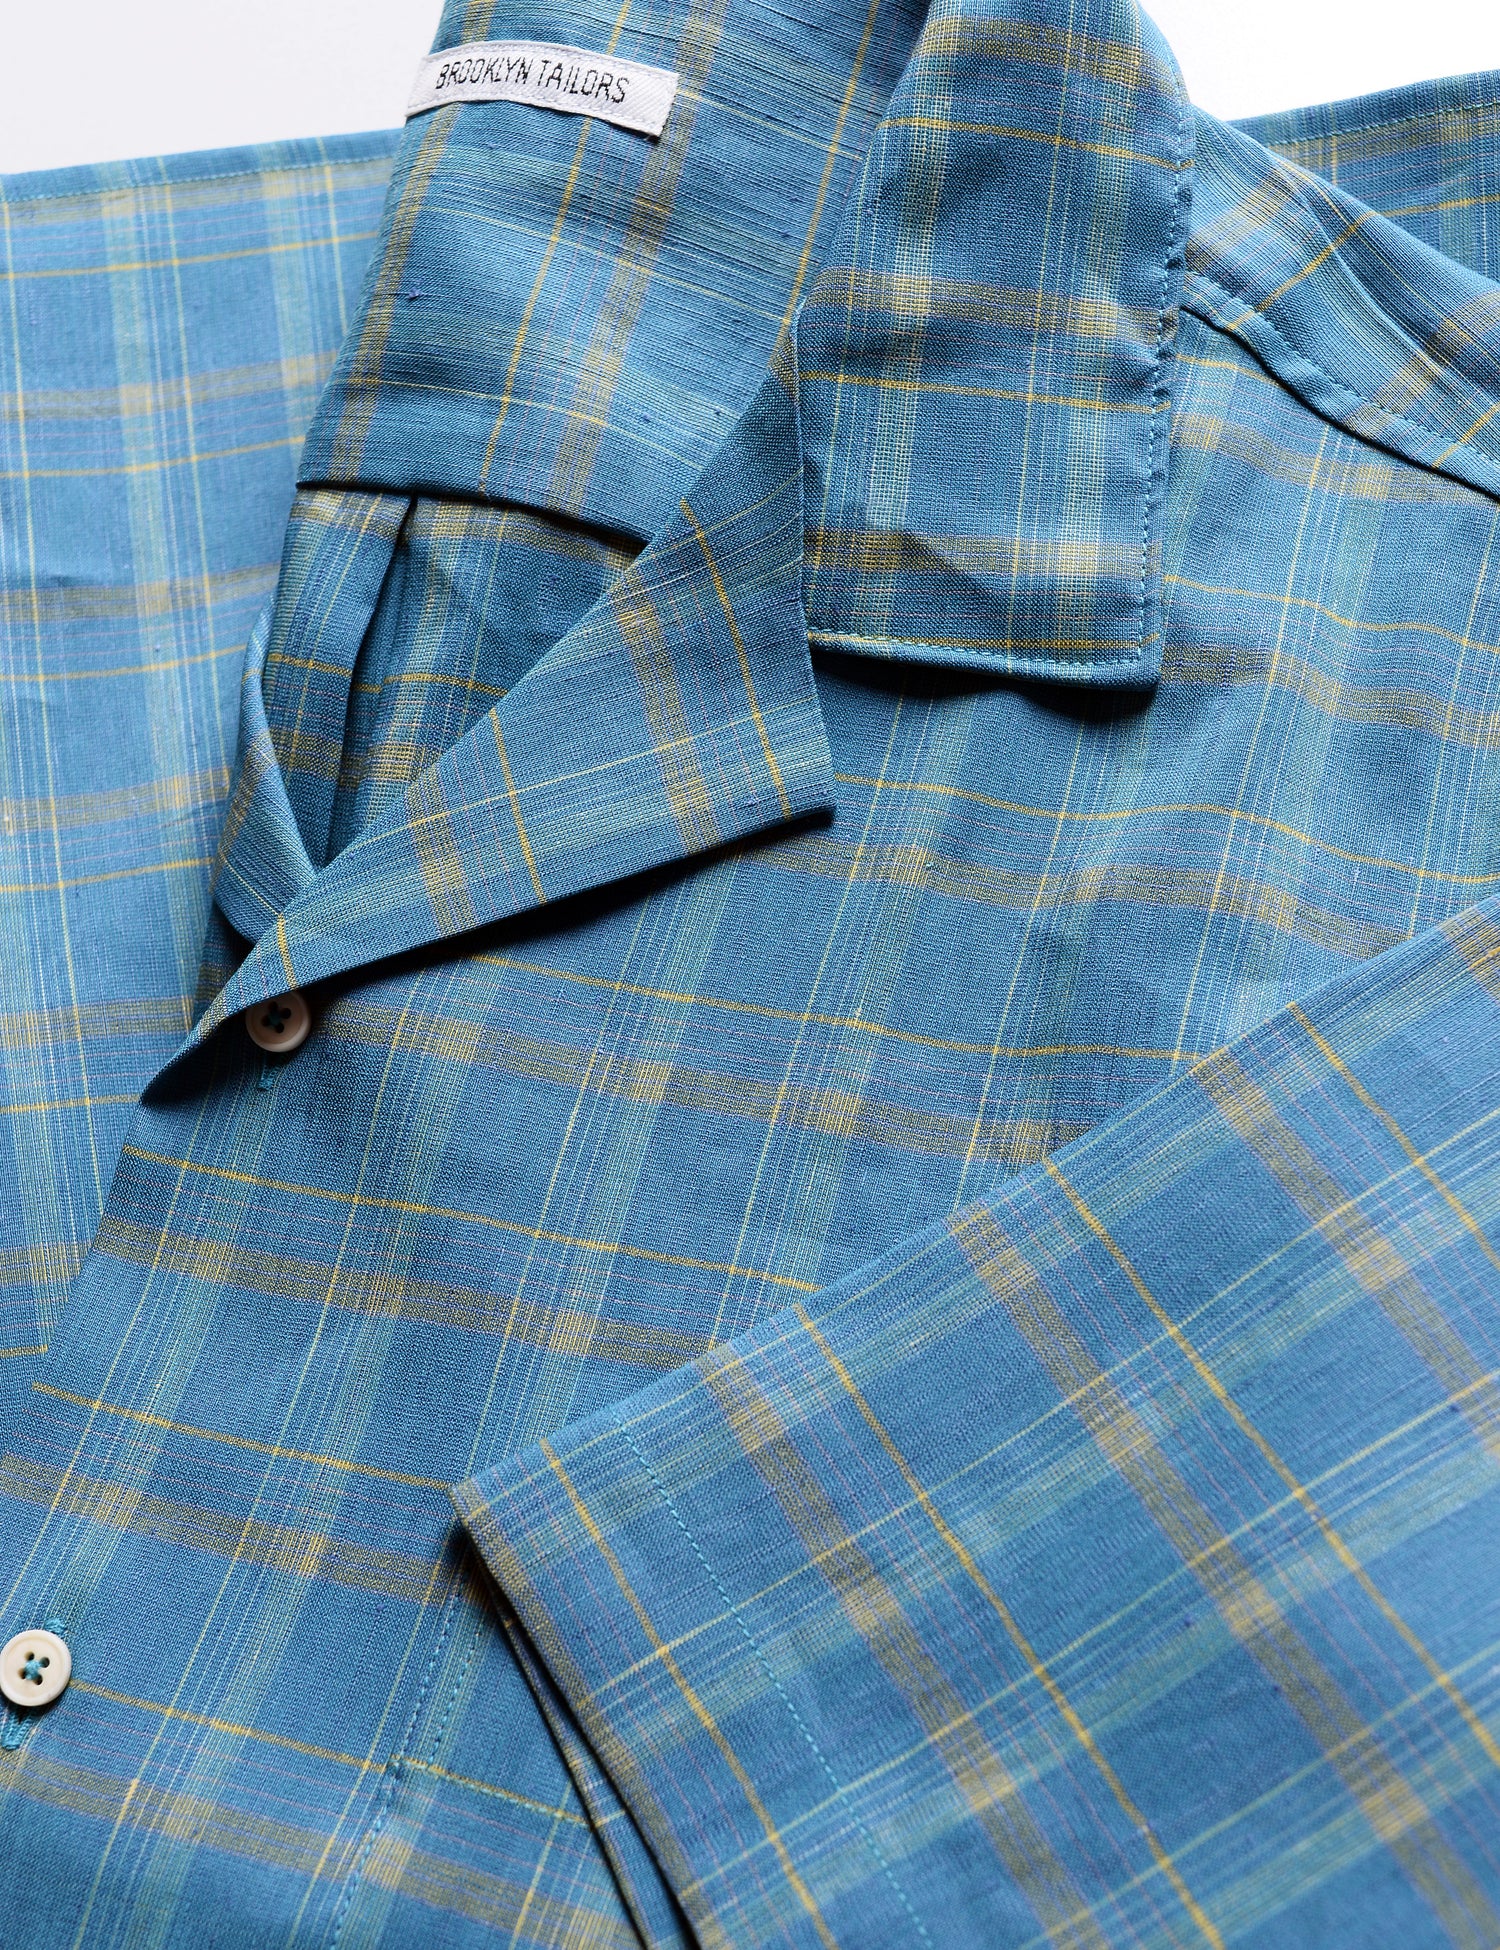 Detail shot of BKT18 Camp Shirt in Roman Check - Ionian Blue showing camp collar and sleeve